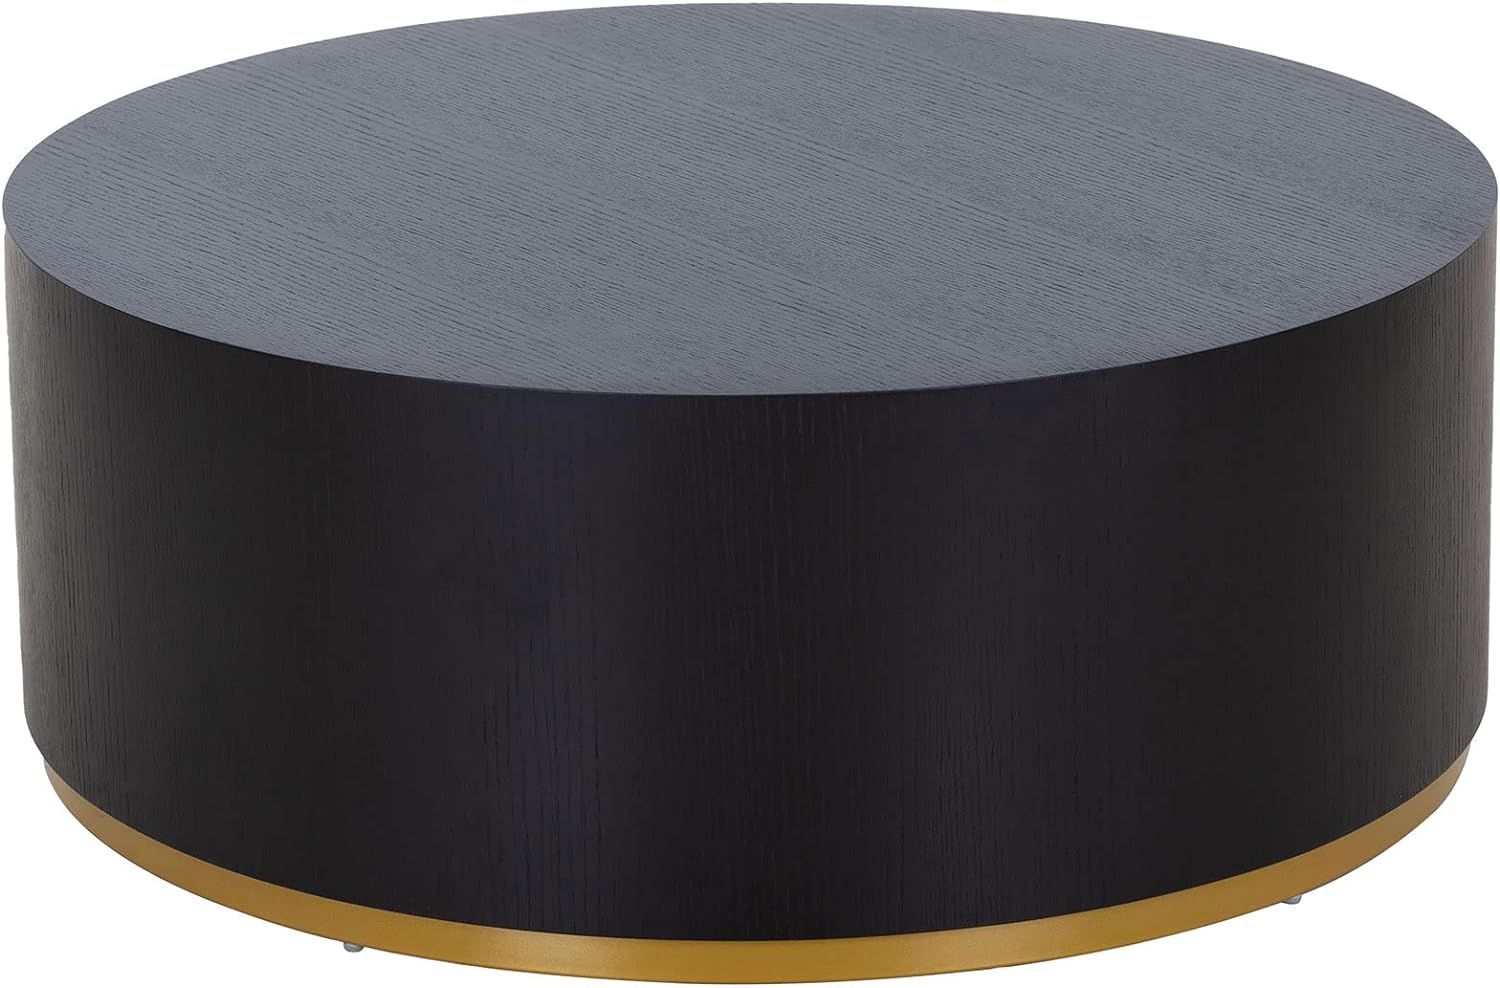 SSLine Classic Drum-Shape Coffee Table Contemporary Round Cocktail Table Black Wood Center Table ... | Amazon (US)